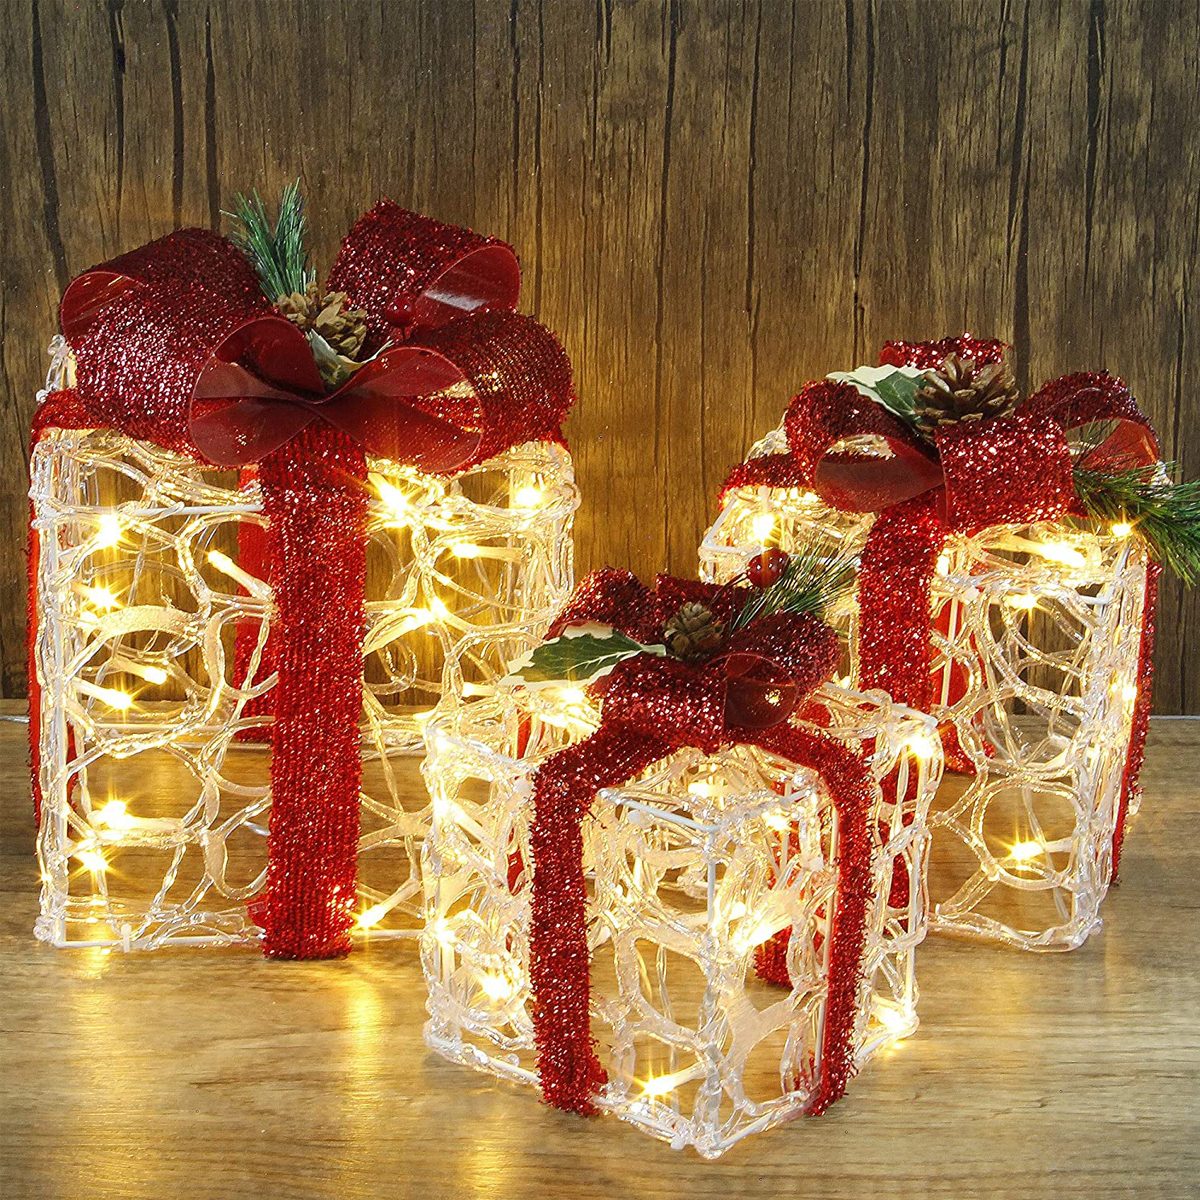 Atdawn Set Of 3 Lighted Gift Boxes Christmas Decorations Ecomm Amazon.com